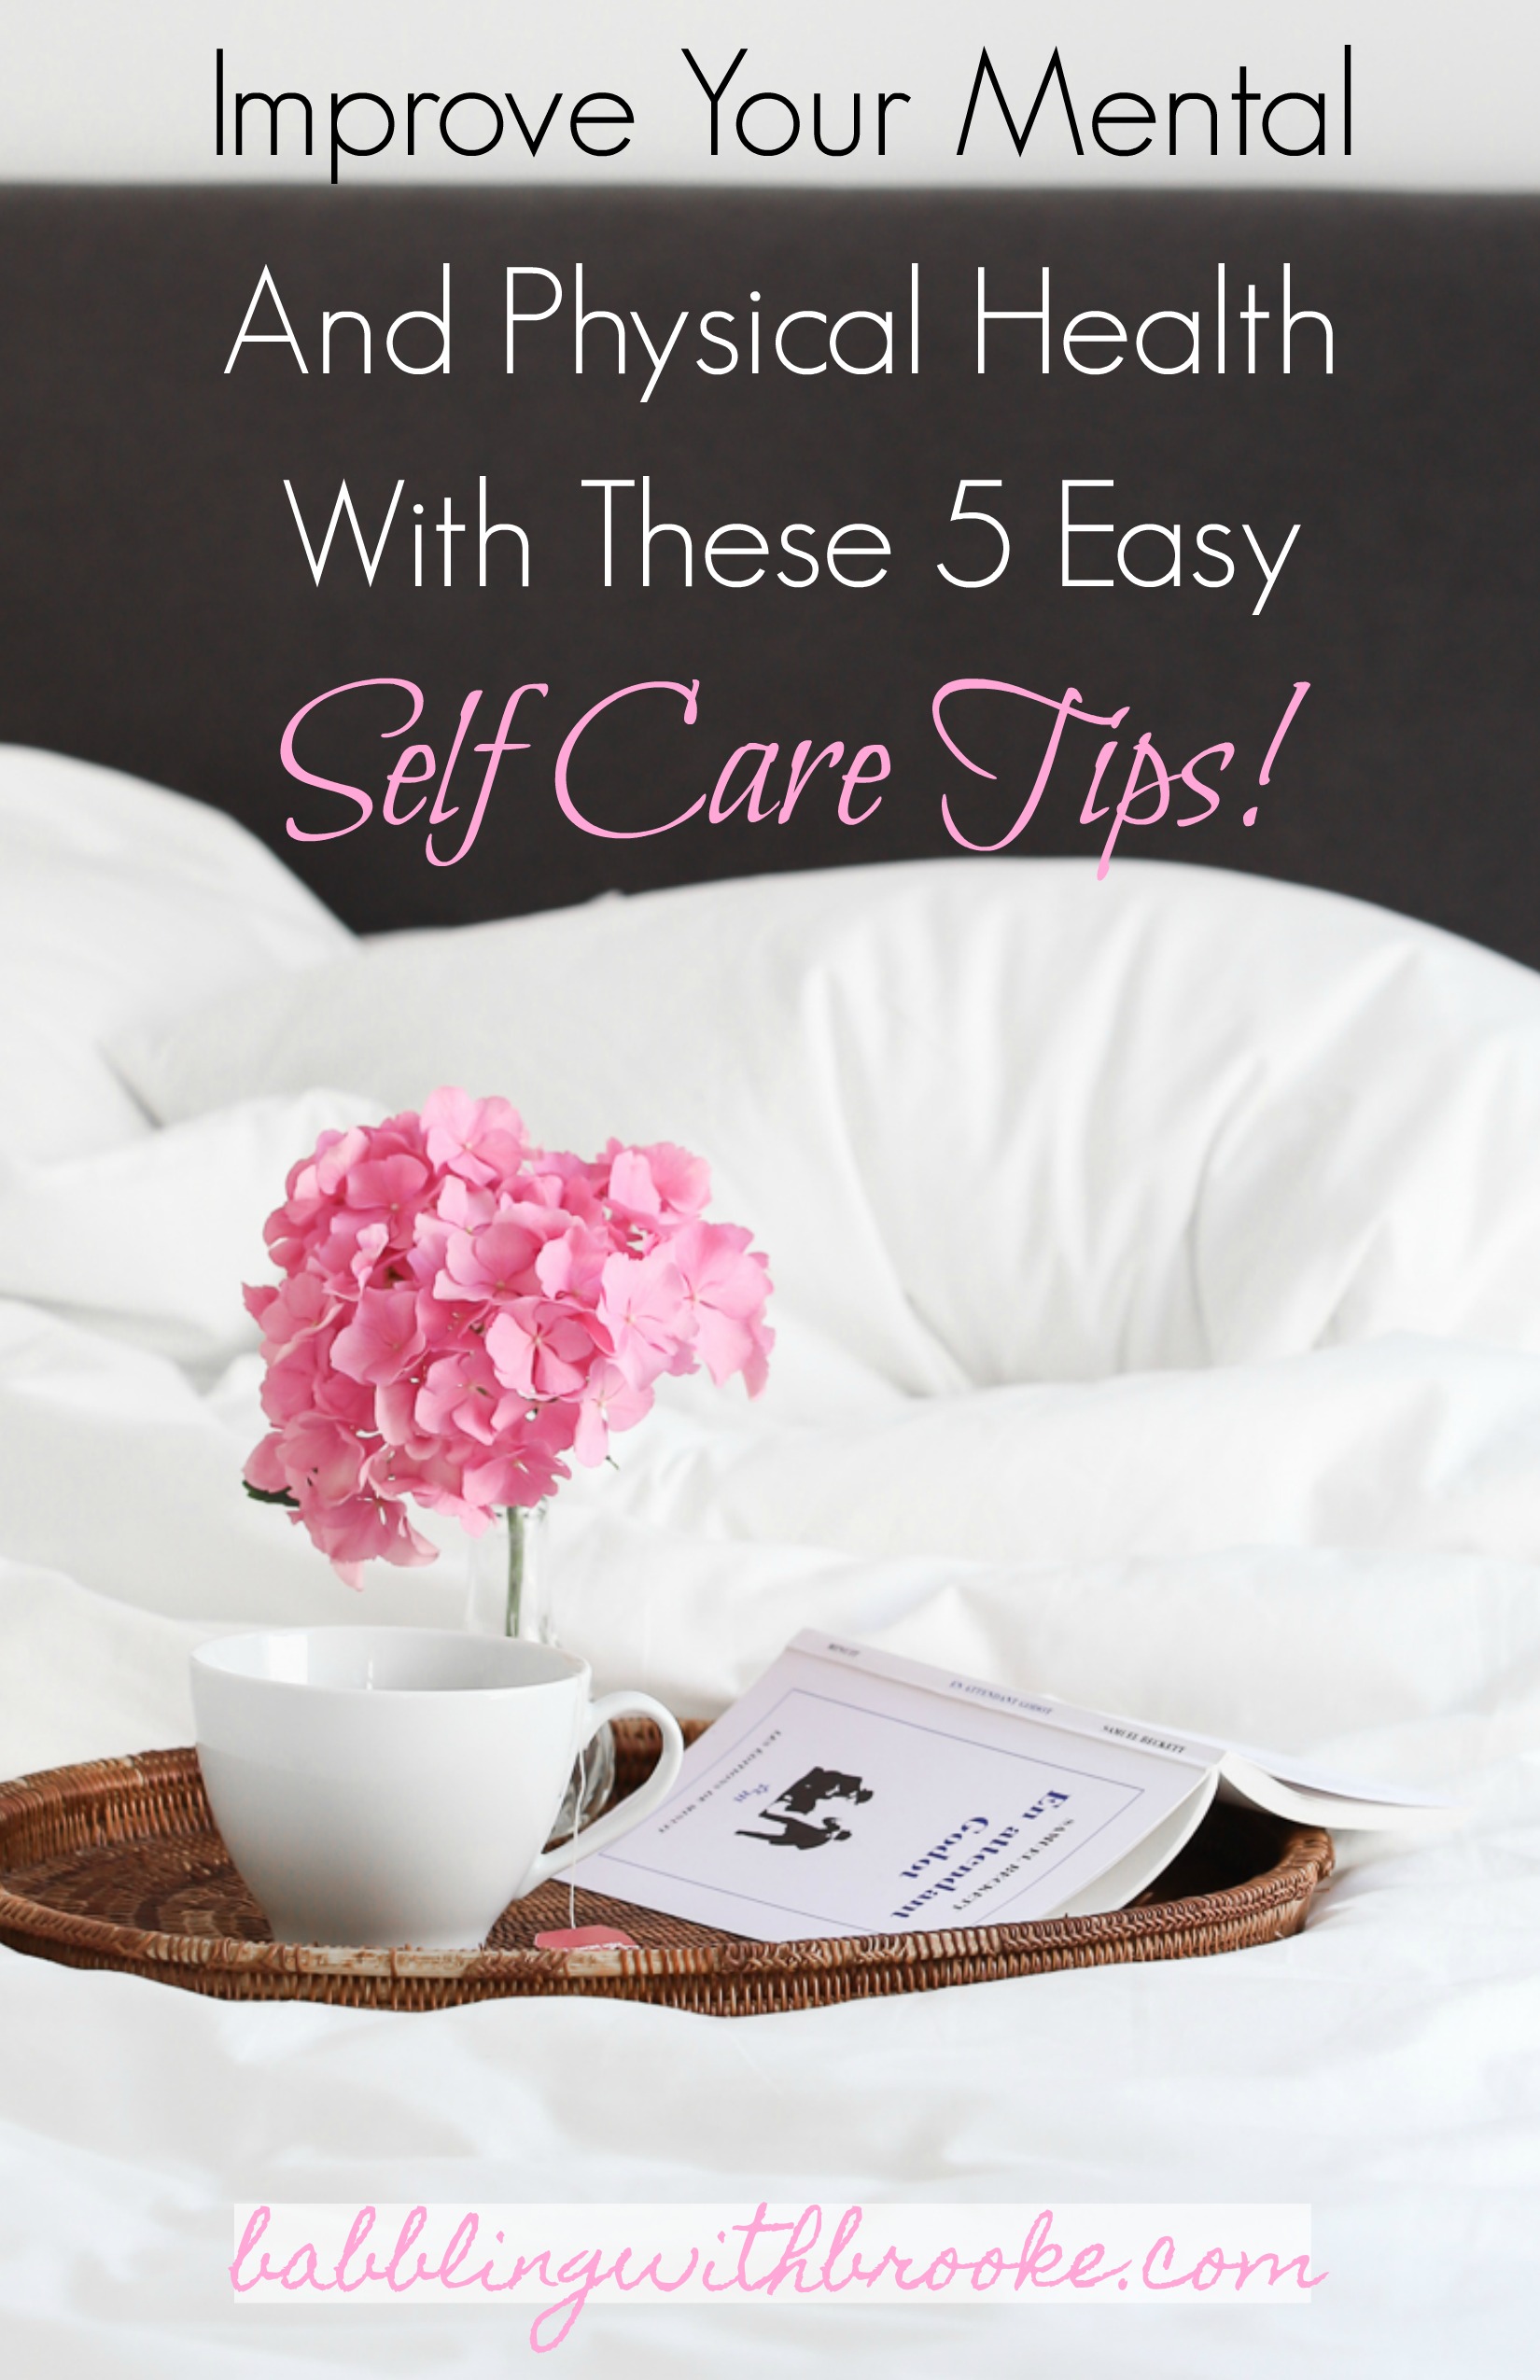 5 easy self care tips to improve your mental attitude and physical health. #selfcare #mentalattitude #physicalhealth #selfcaretips